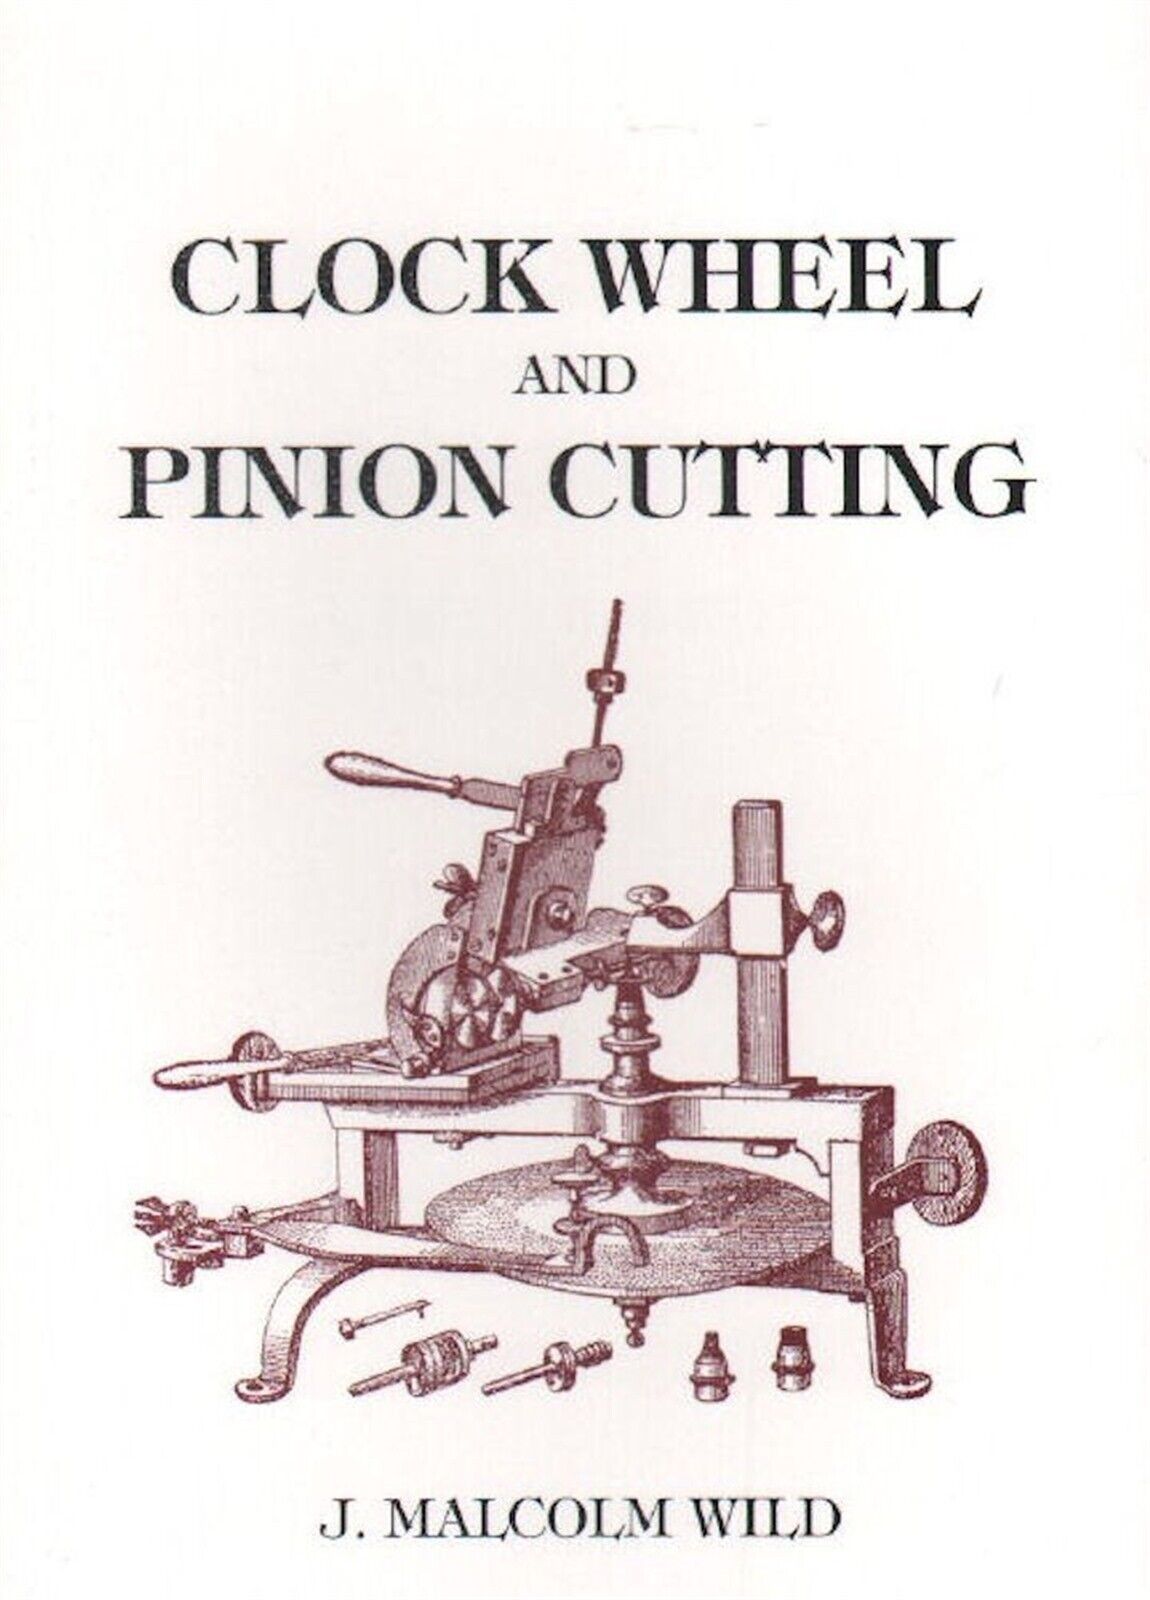 Clock Wheel and Pinion Cutting by J. Malcolm Wild